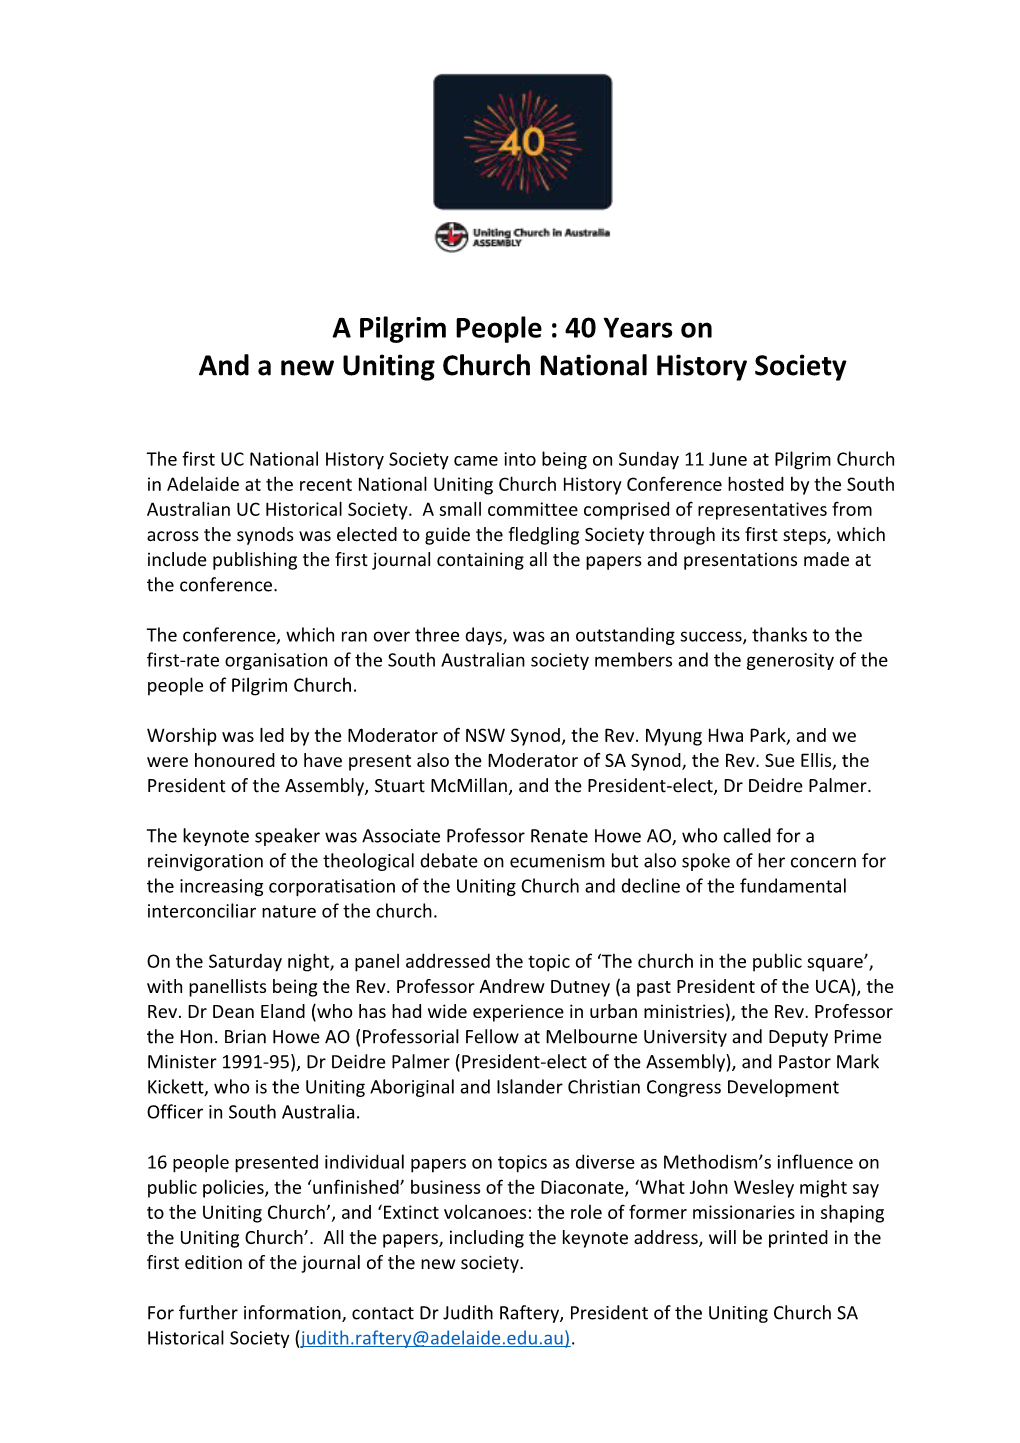 And a New Uniting Church National History Society